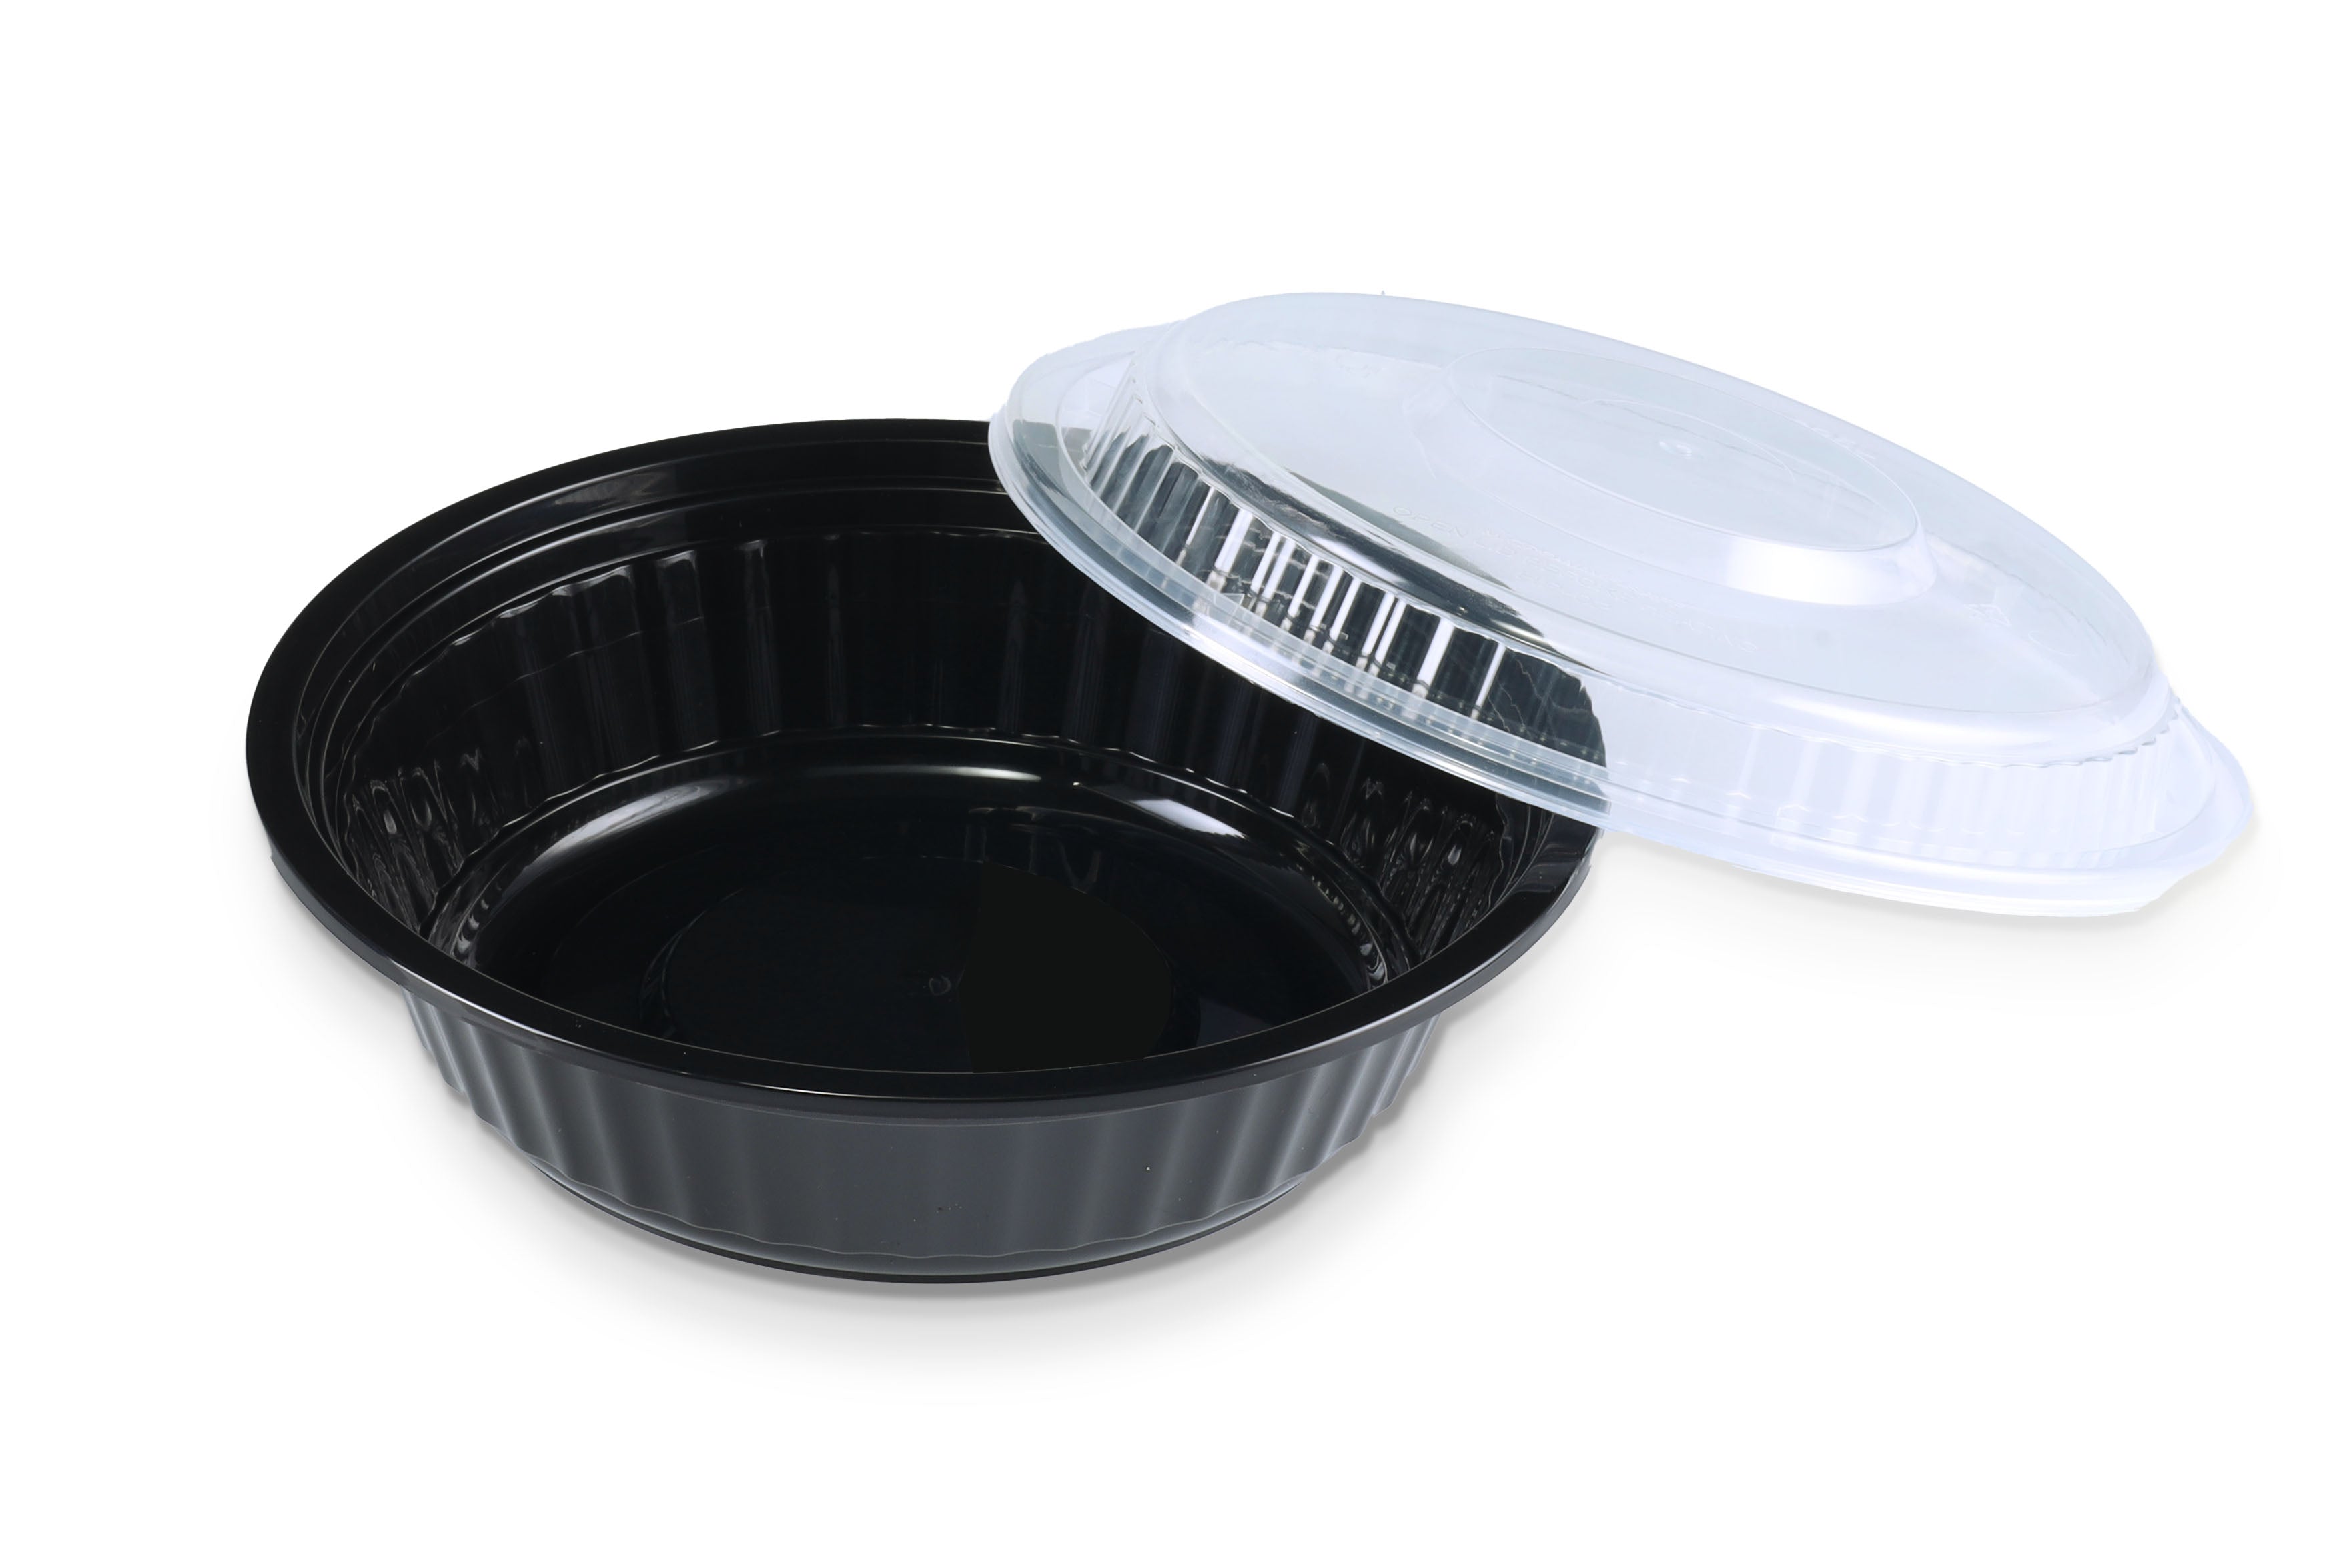 150 Pack - Sazon 16oz Round Meal Prep Containers, Reusable, Stackable